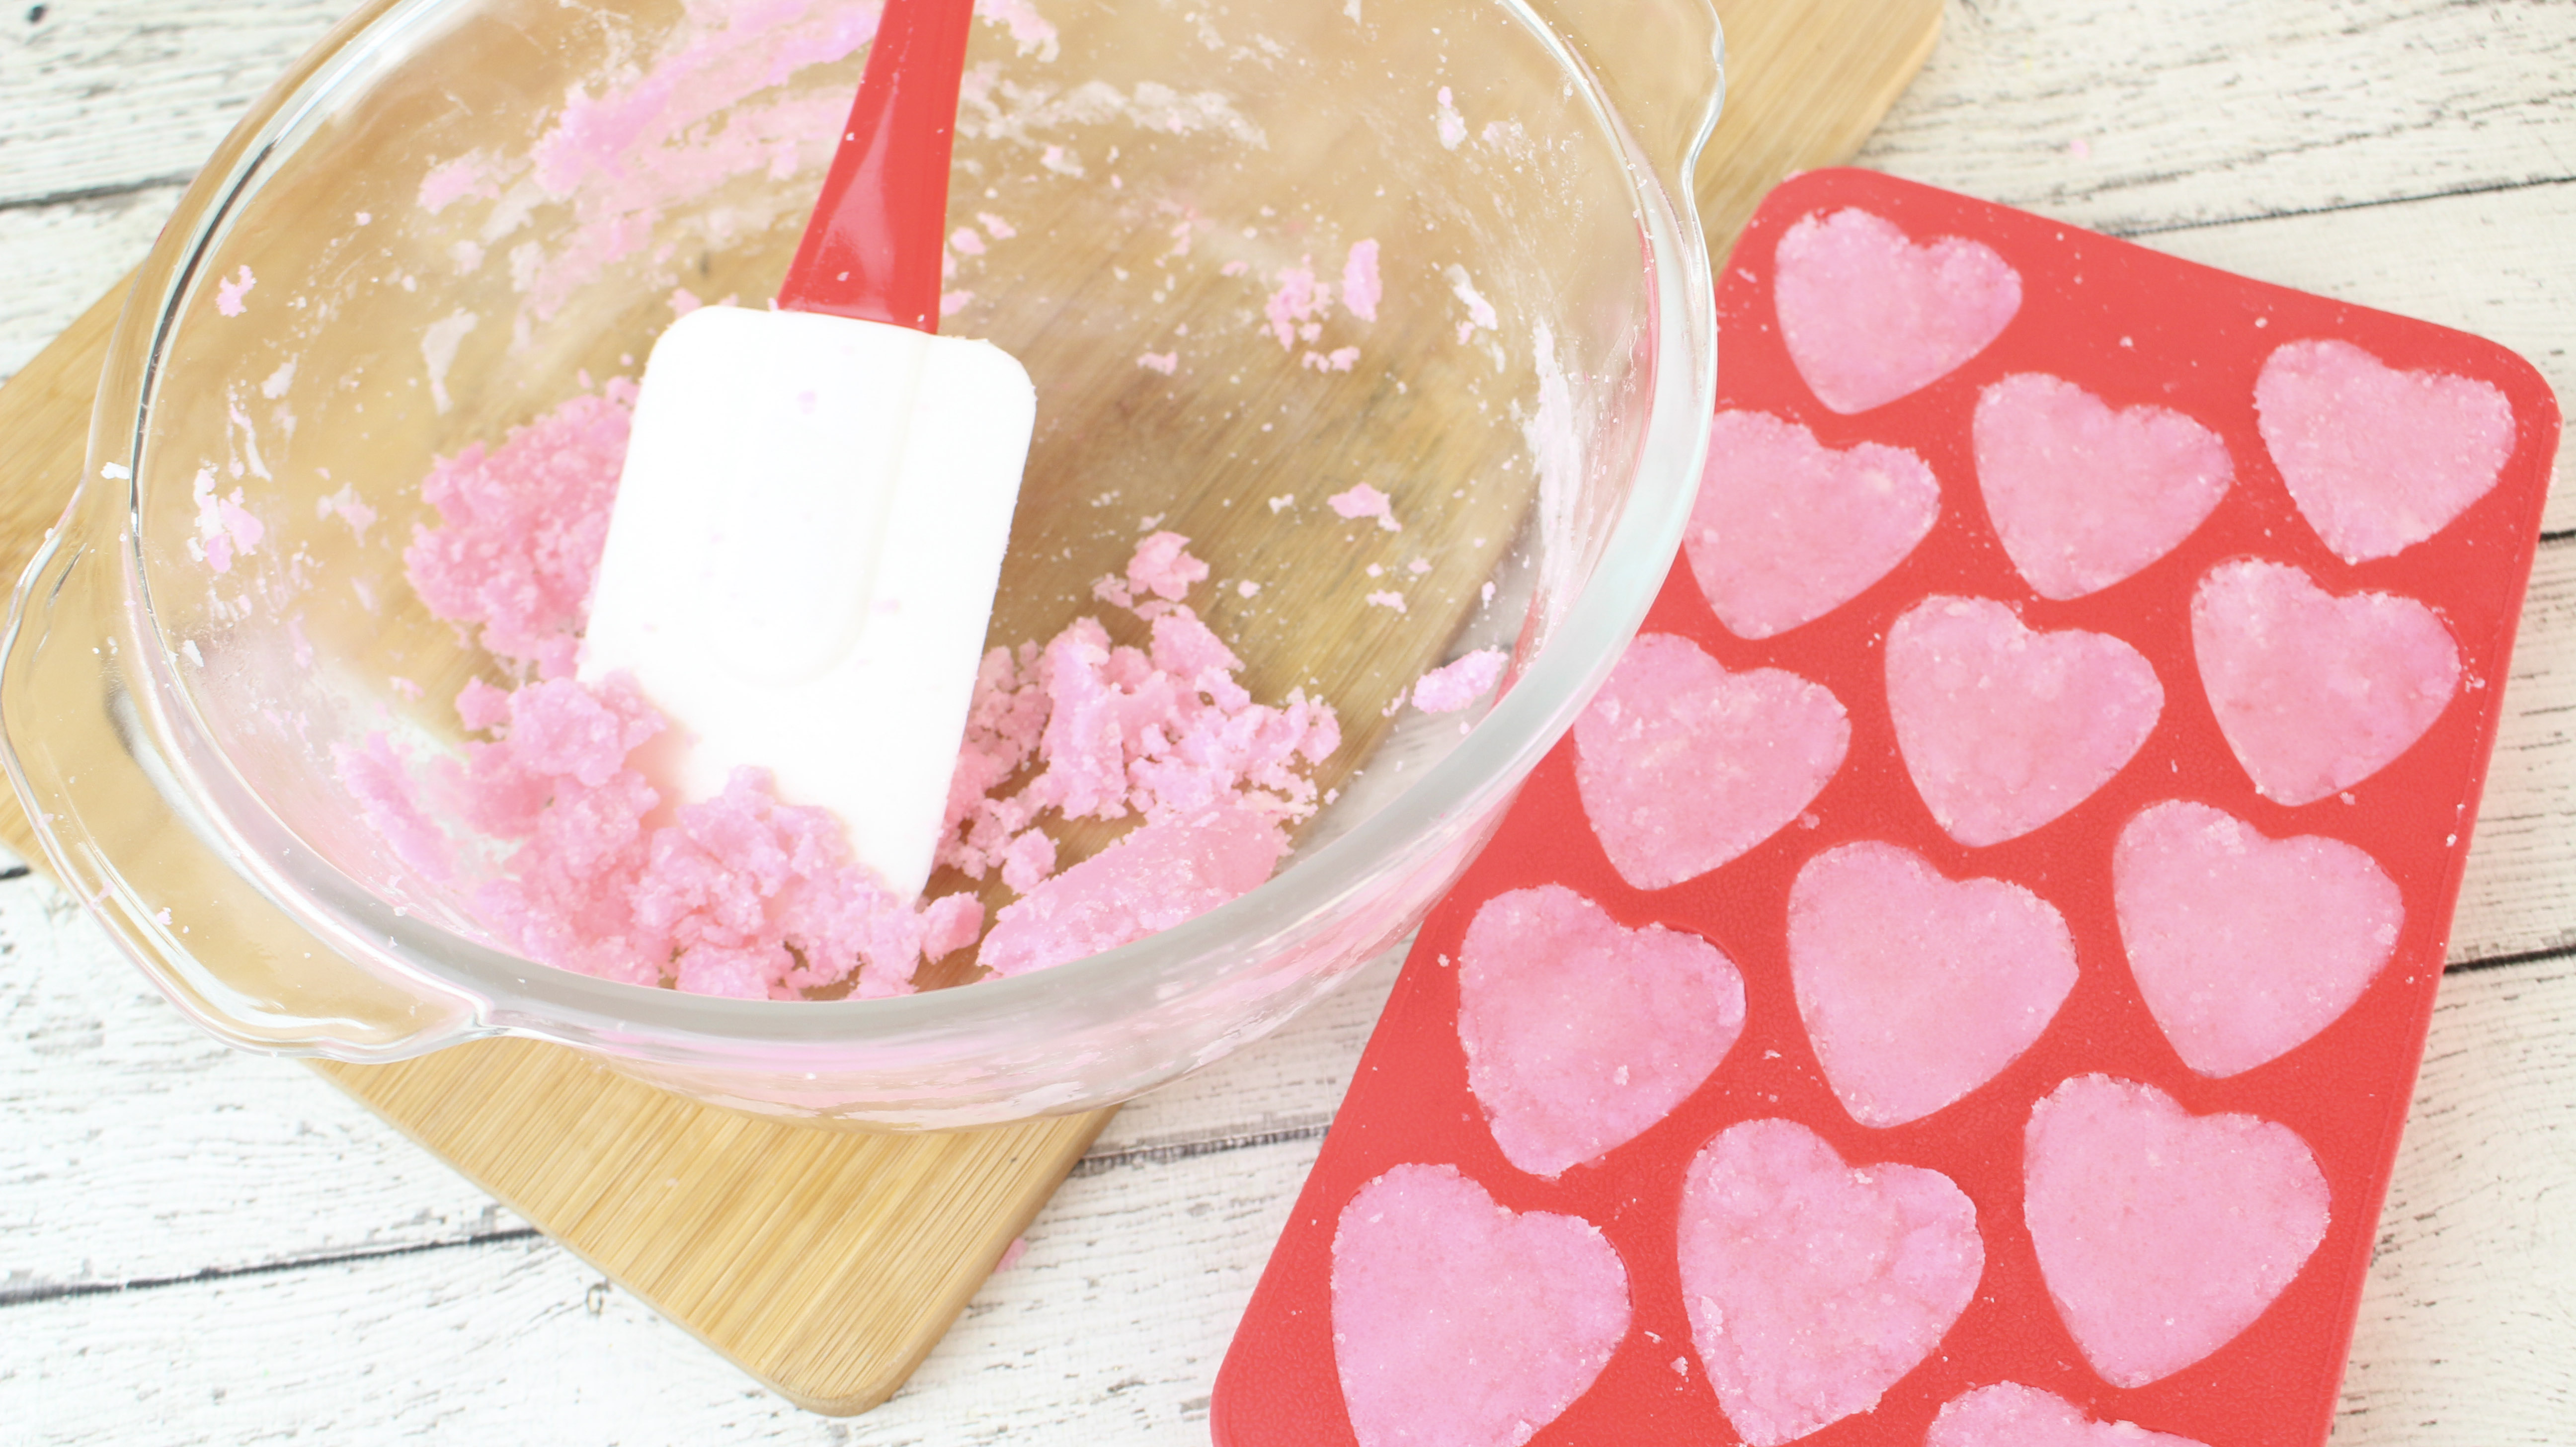 Add the sugar mixture into the molds to make Rose Vanilla Exfoliating Sugar Scrub Soap Cubes